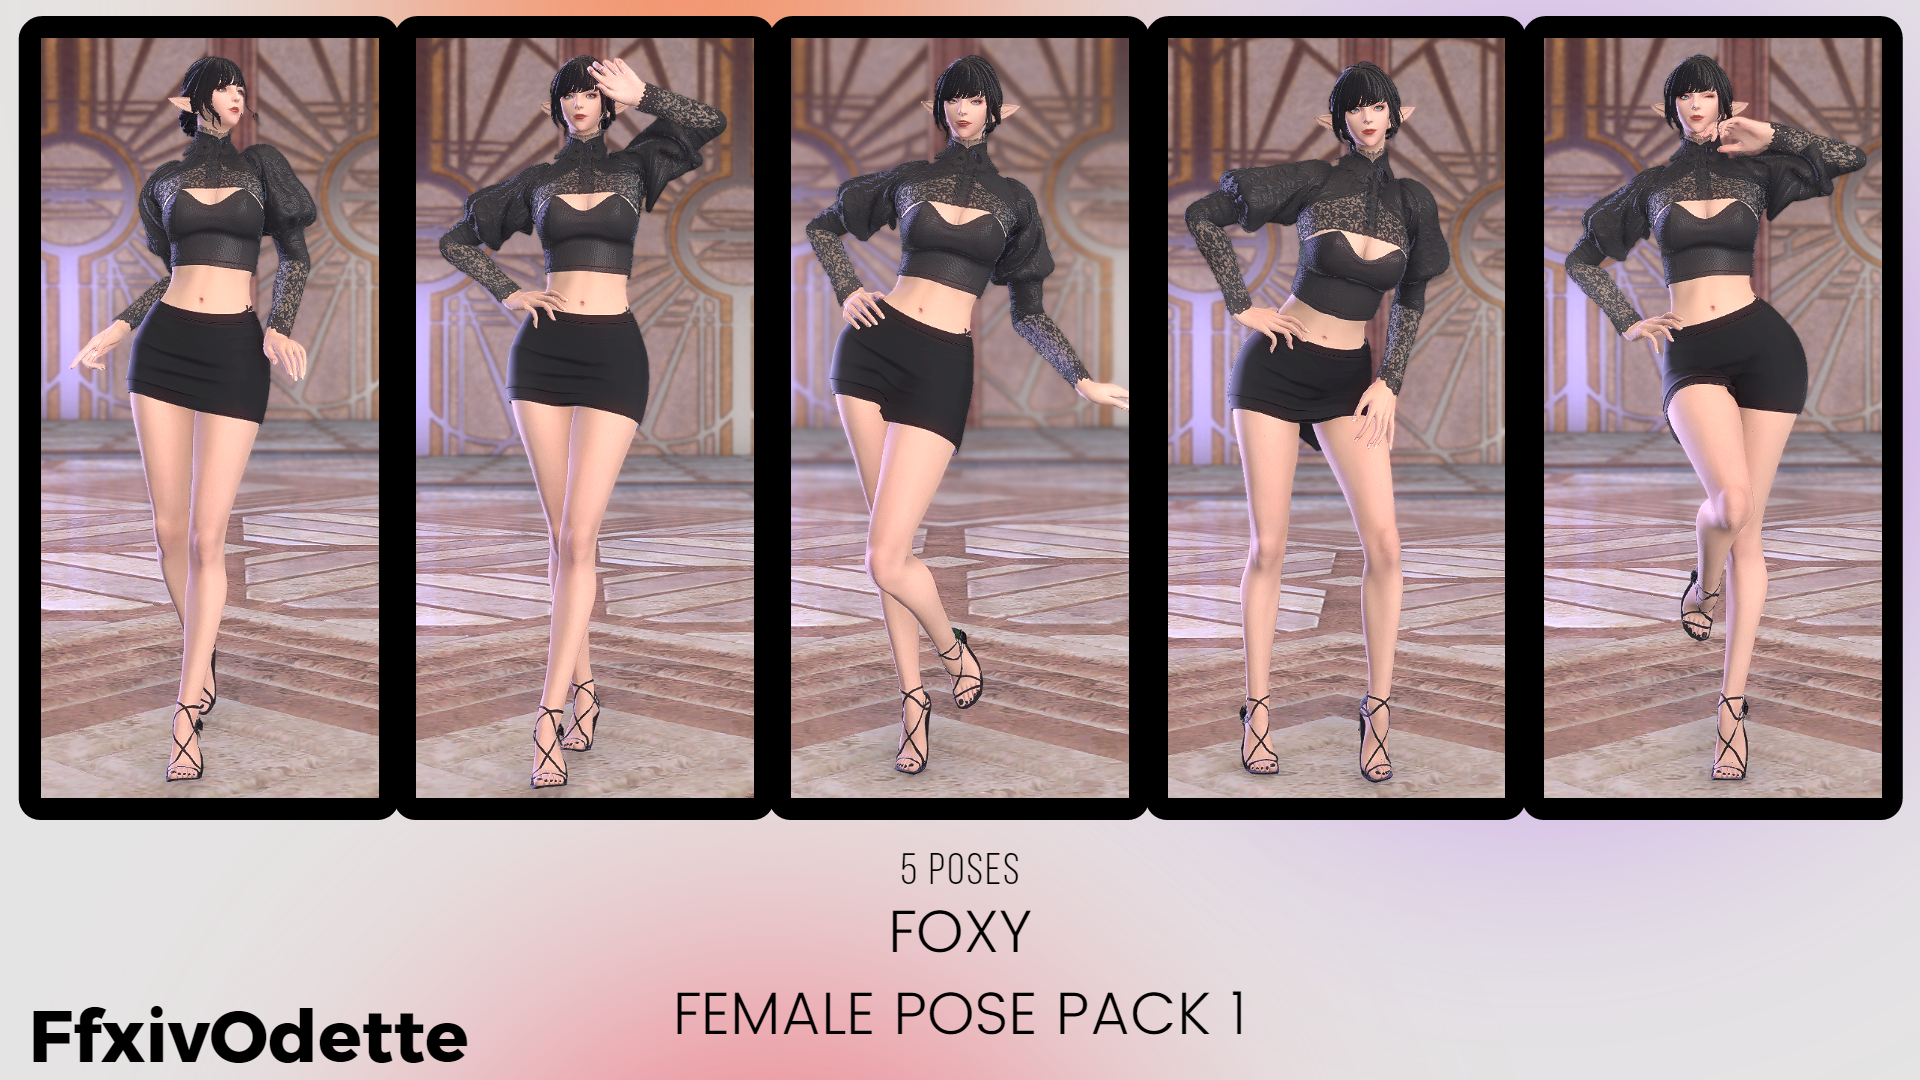 Cassandra Grusel on Tumblr: ♤ New Pose Pack ♤ Emotion Poses In Game Posen ♤  10 Solo Poses + All in One ♤ Use with Andrew poses player (Klick) ♤ Use...